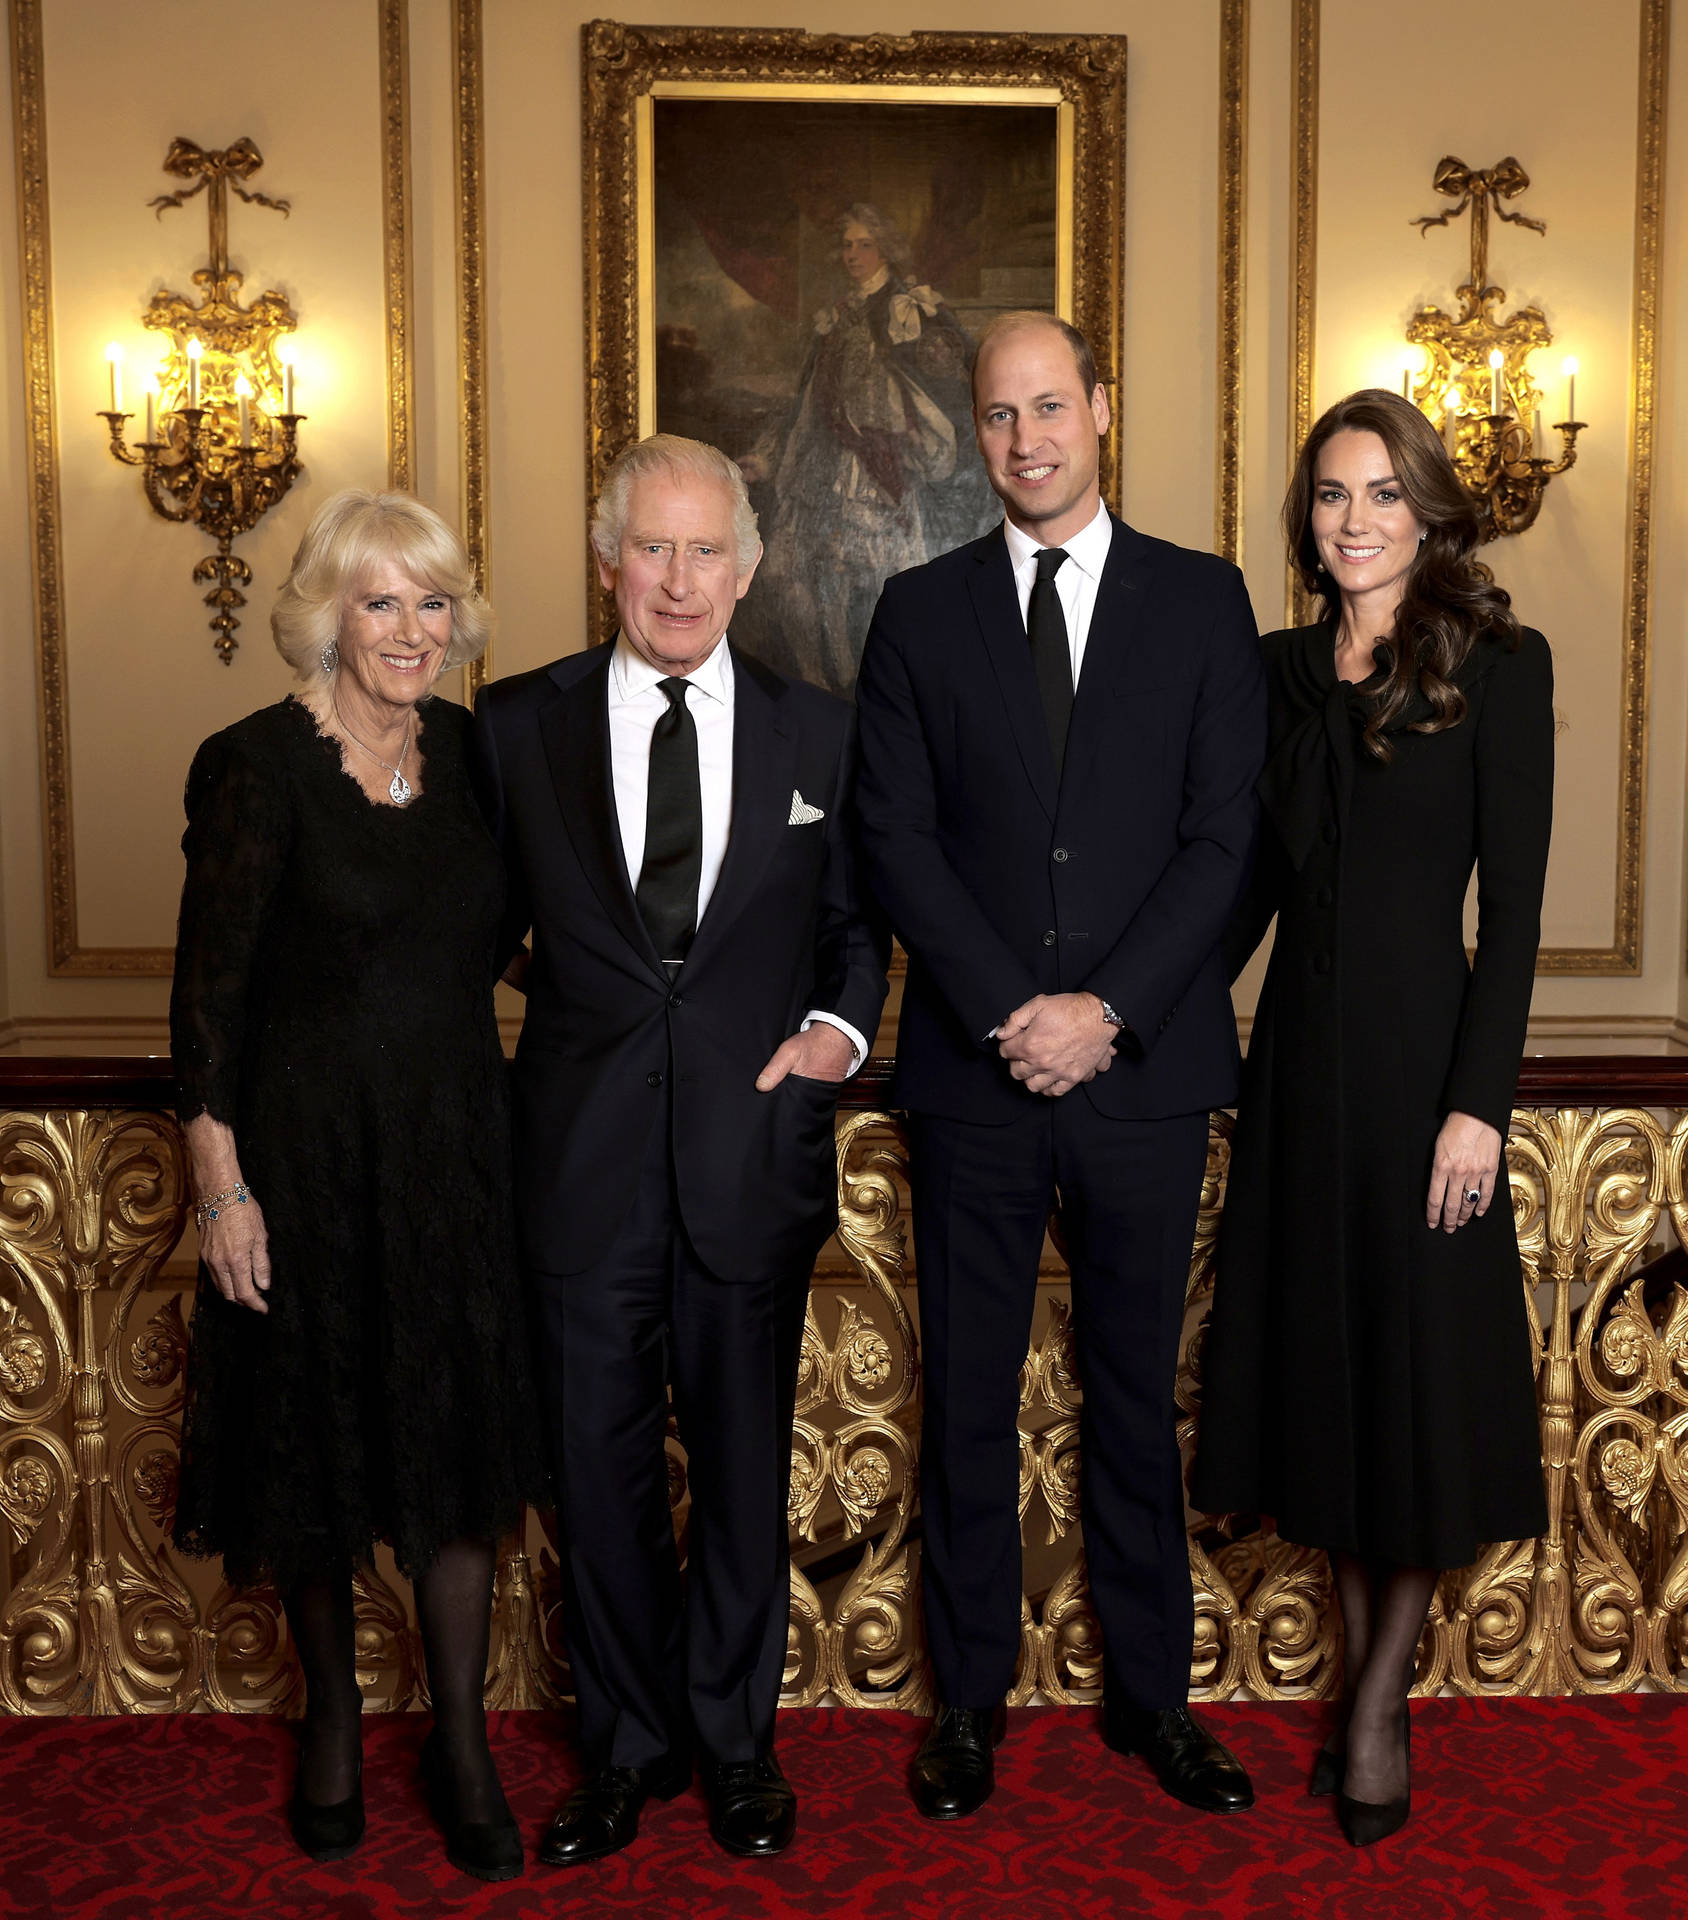 Kate Middleton, Prince William, Prince Charles And Prince Philip Pose For A Photo Wallpaper